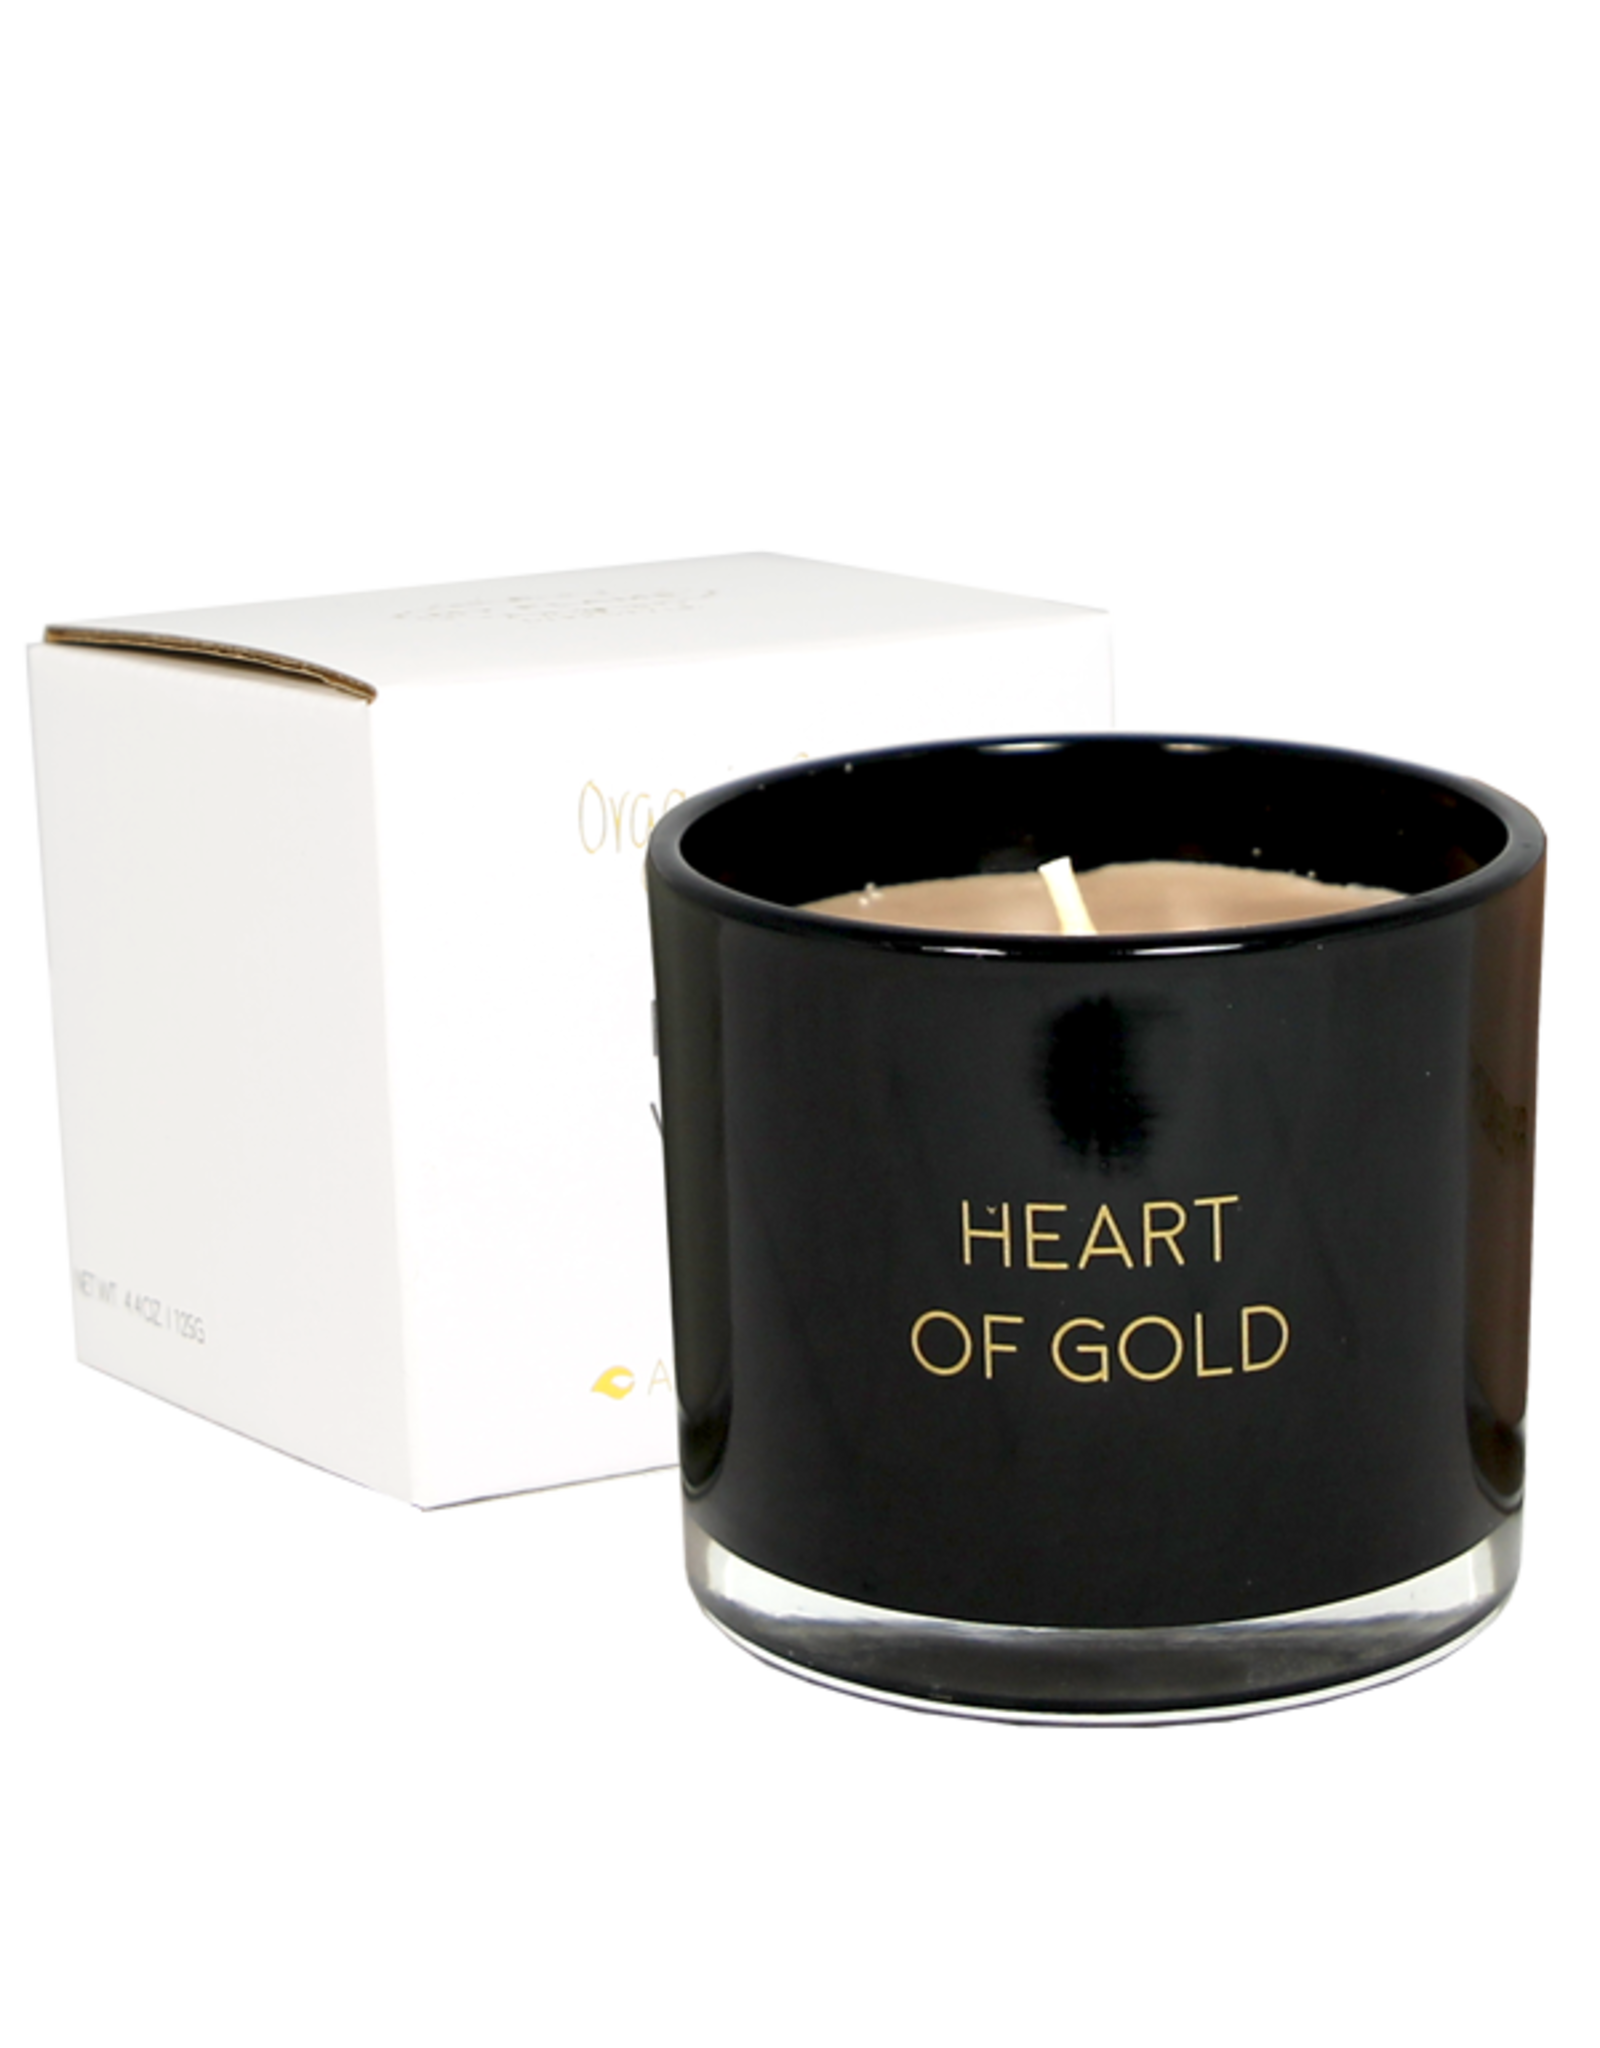 My flame Lifestyle Geurkaars met wens-armband | Heart of gold